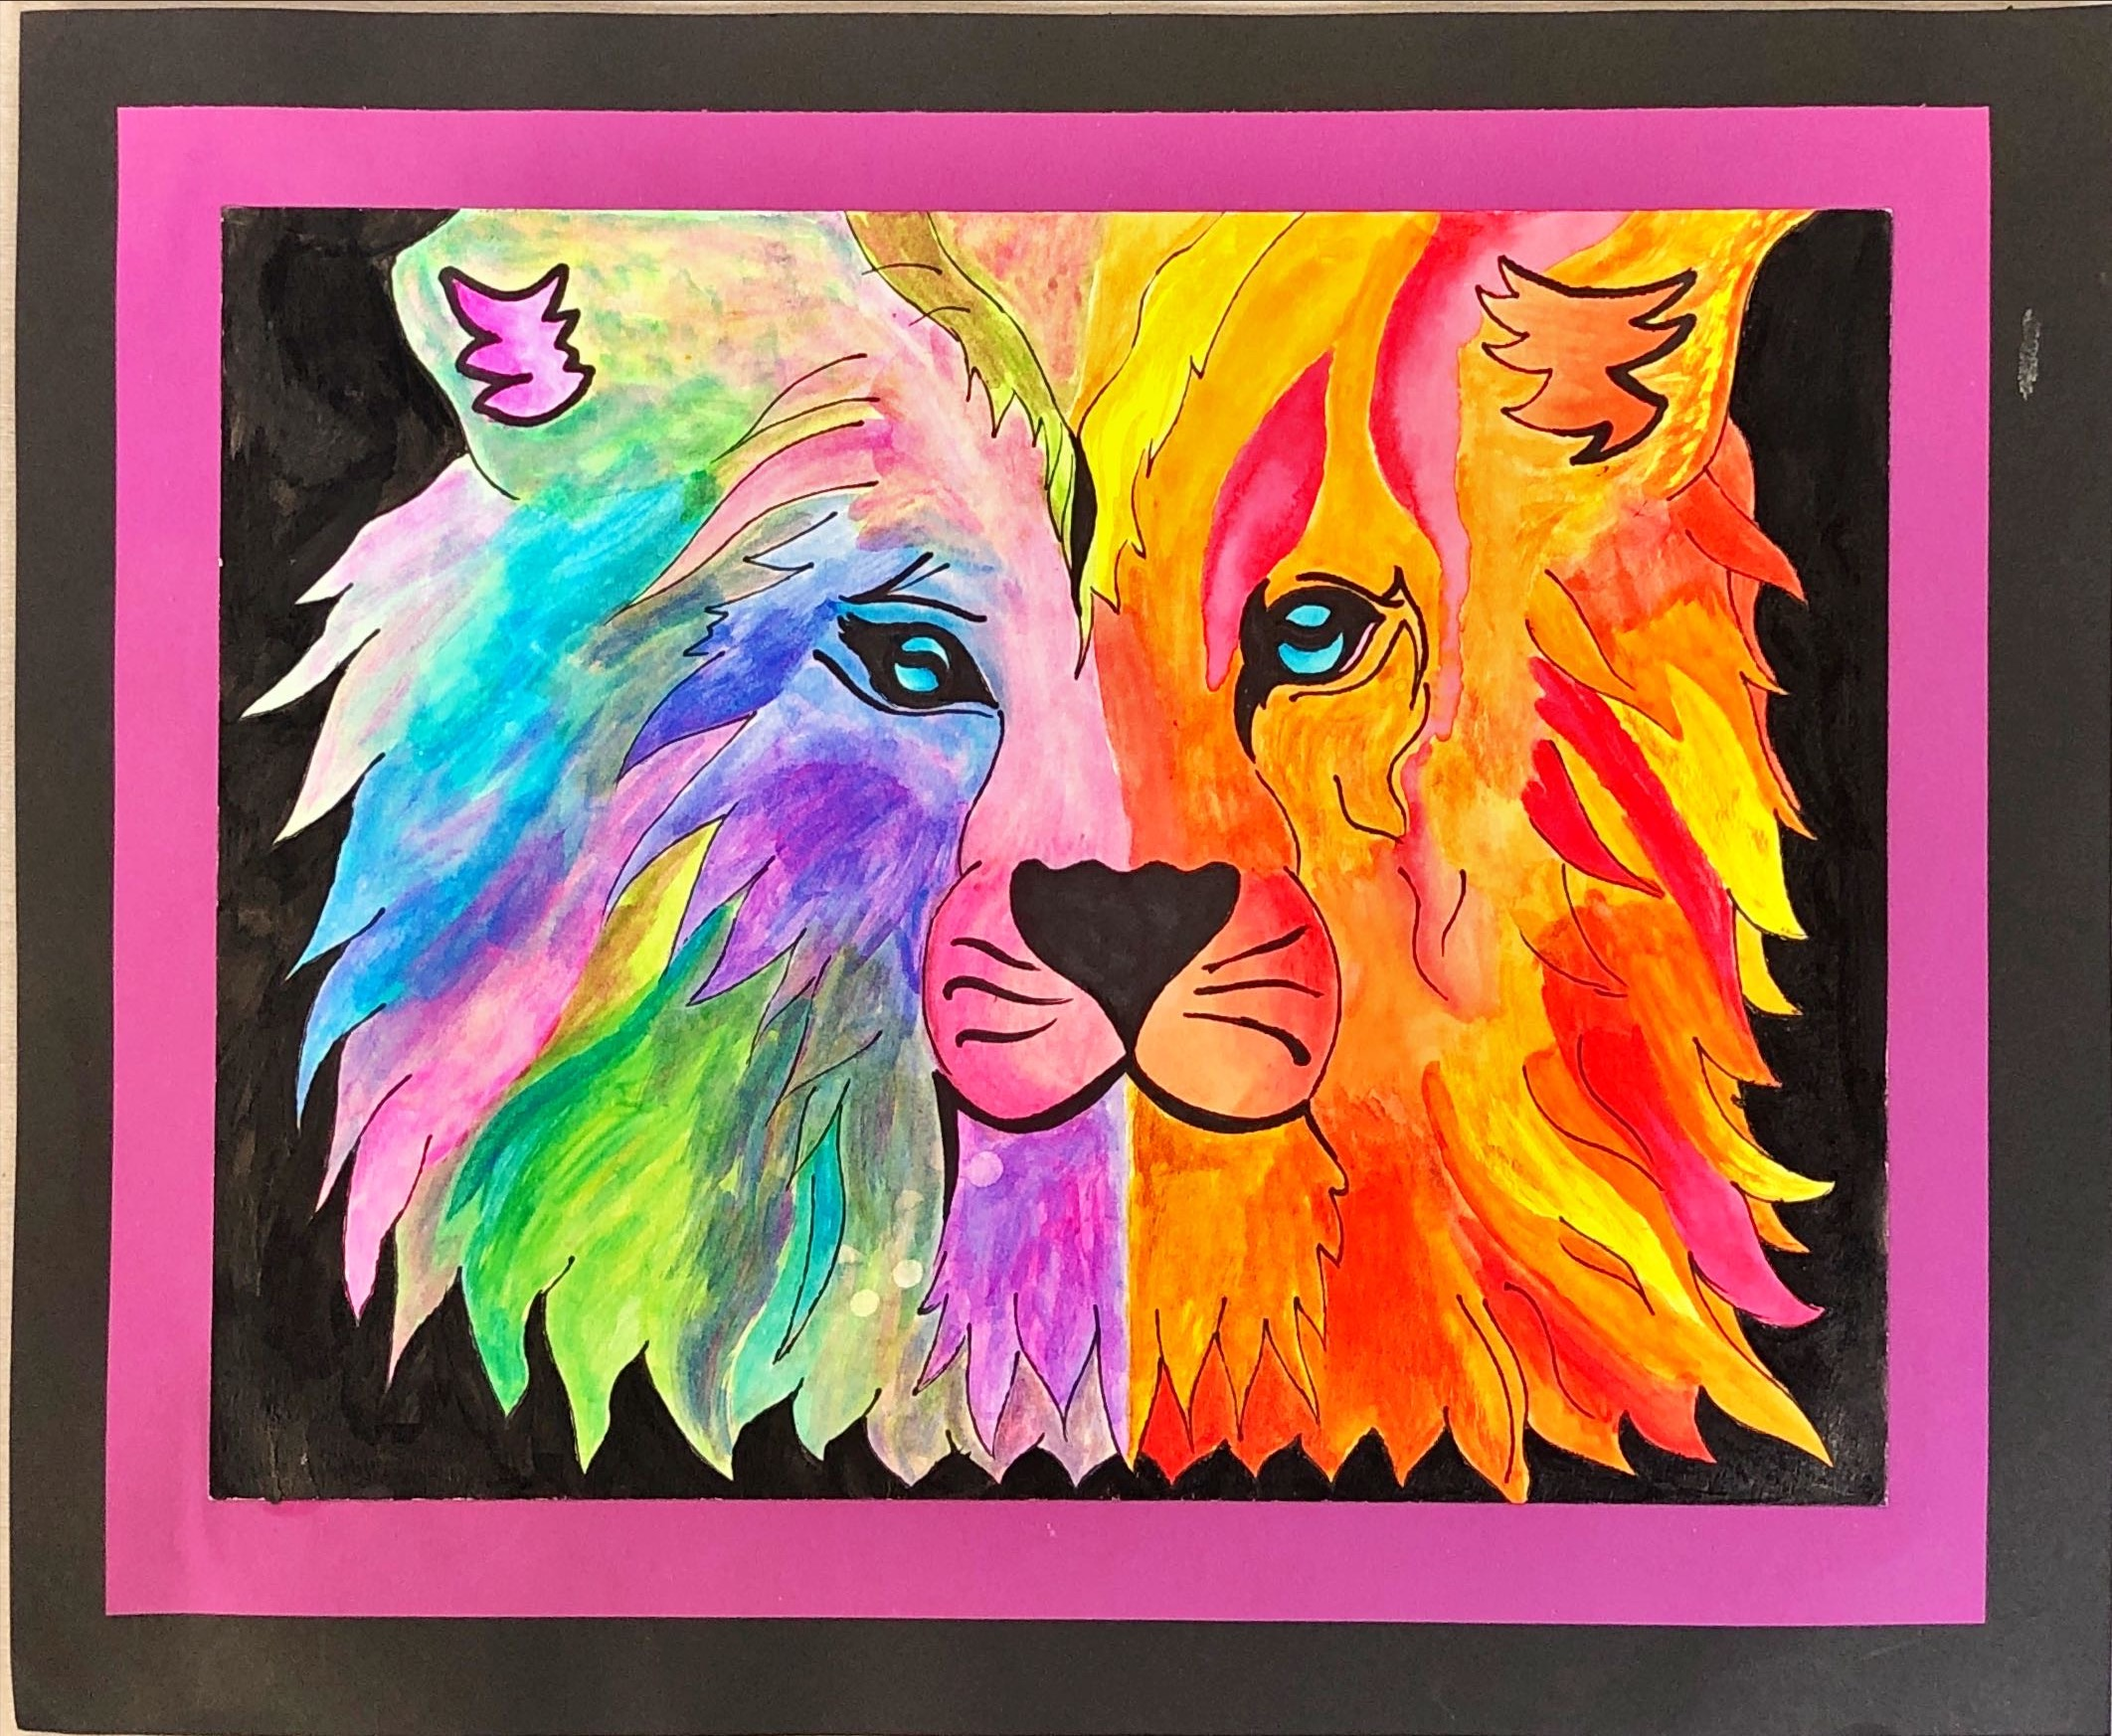 Art work completed by Esther Haworth - Lion